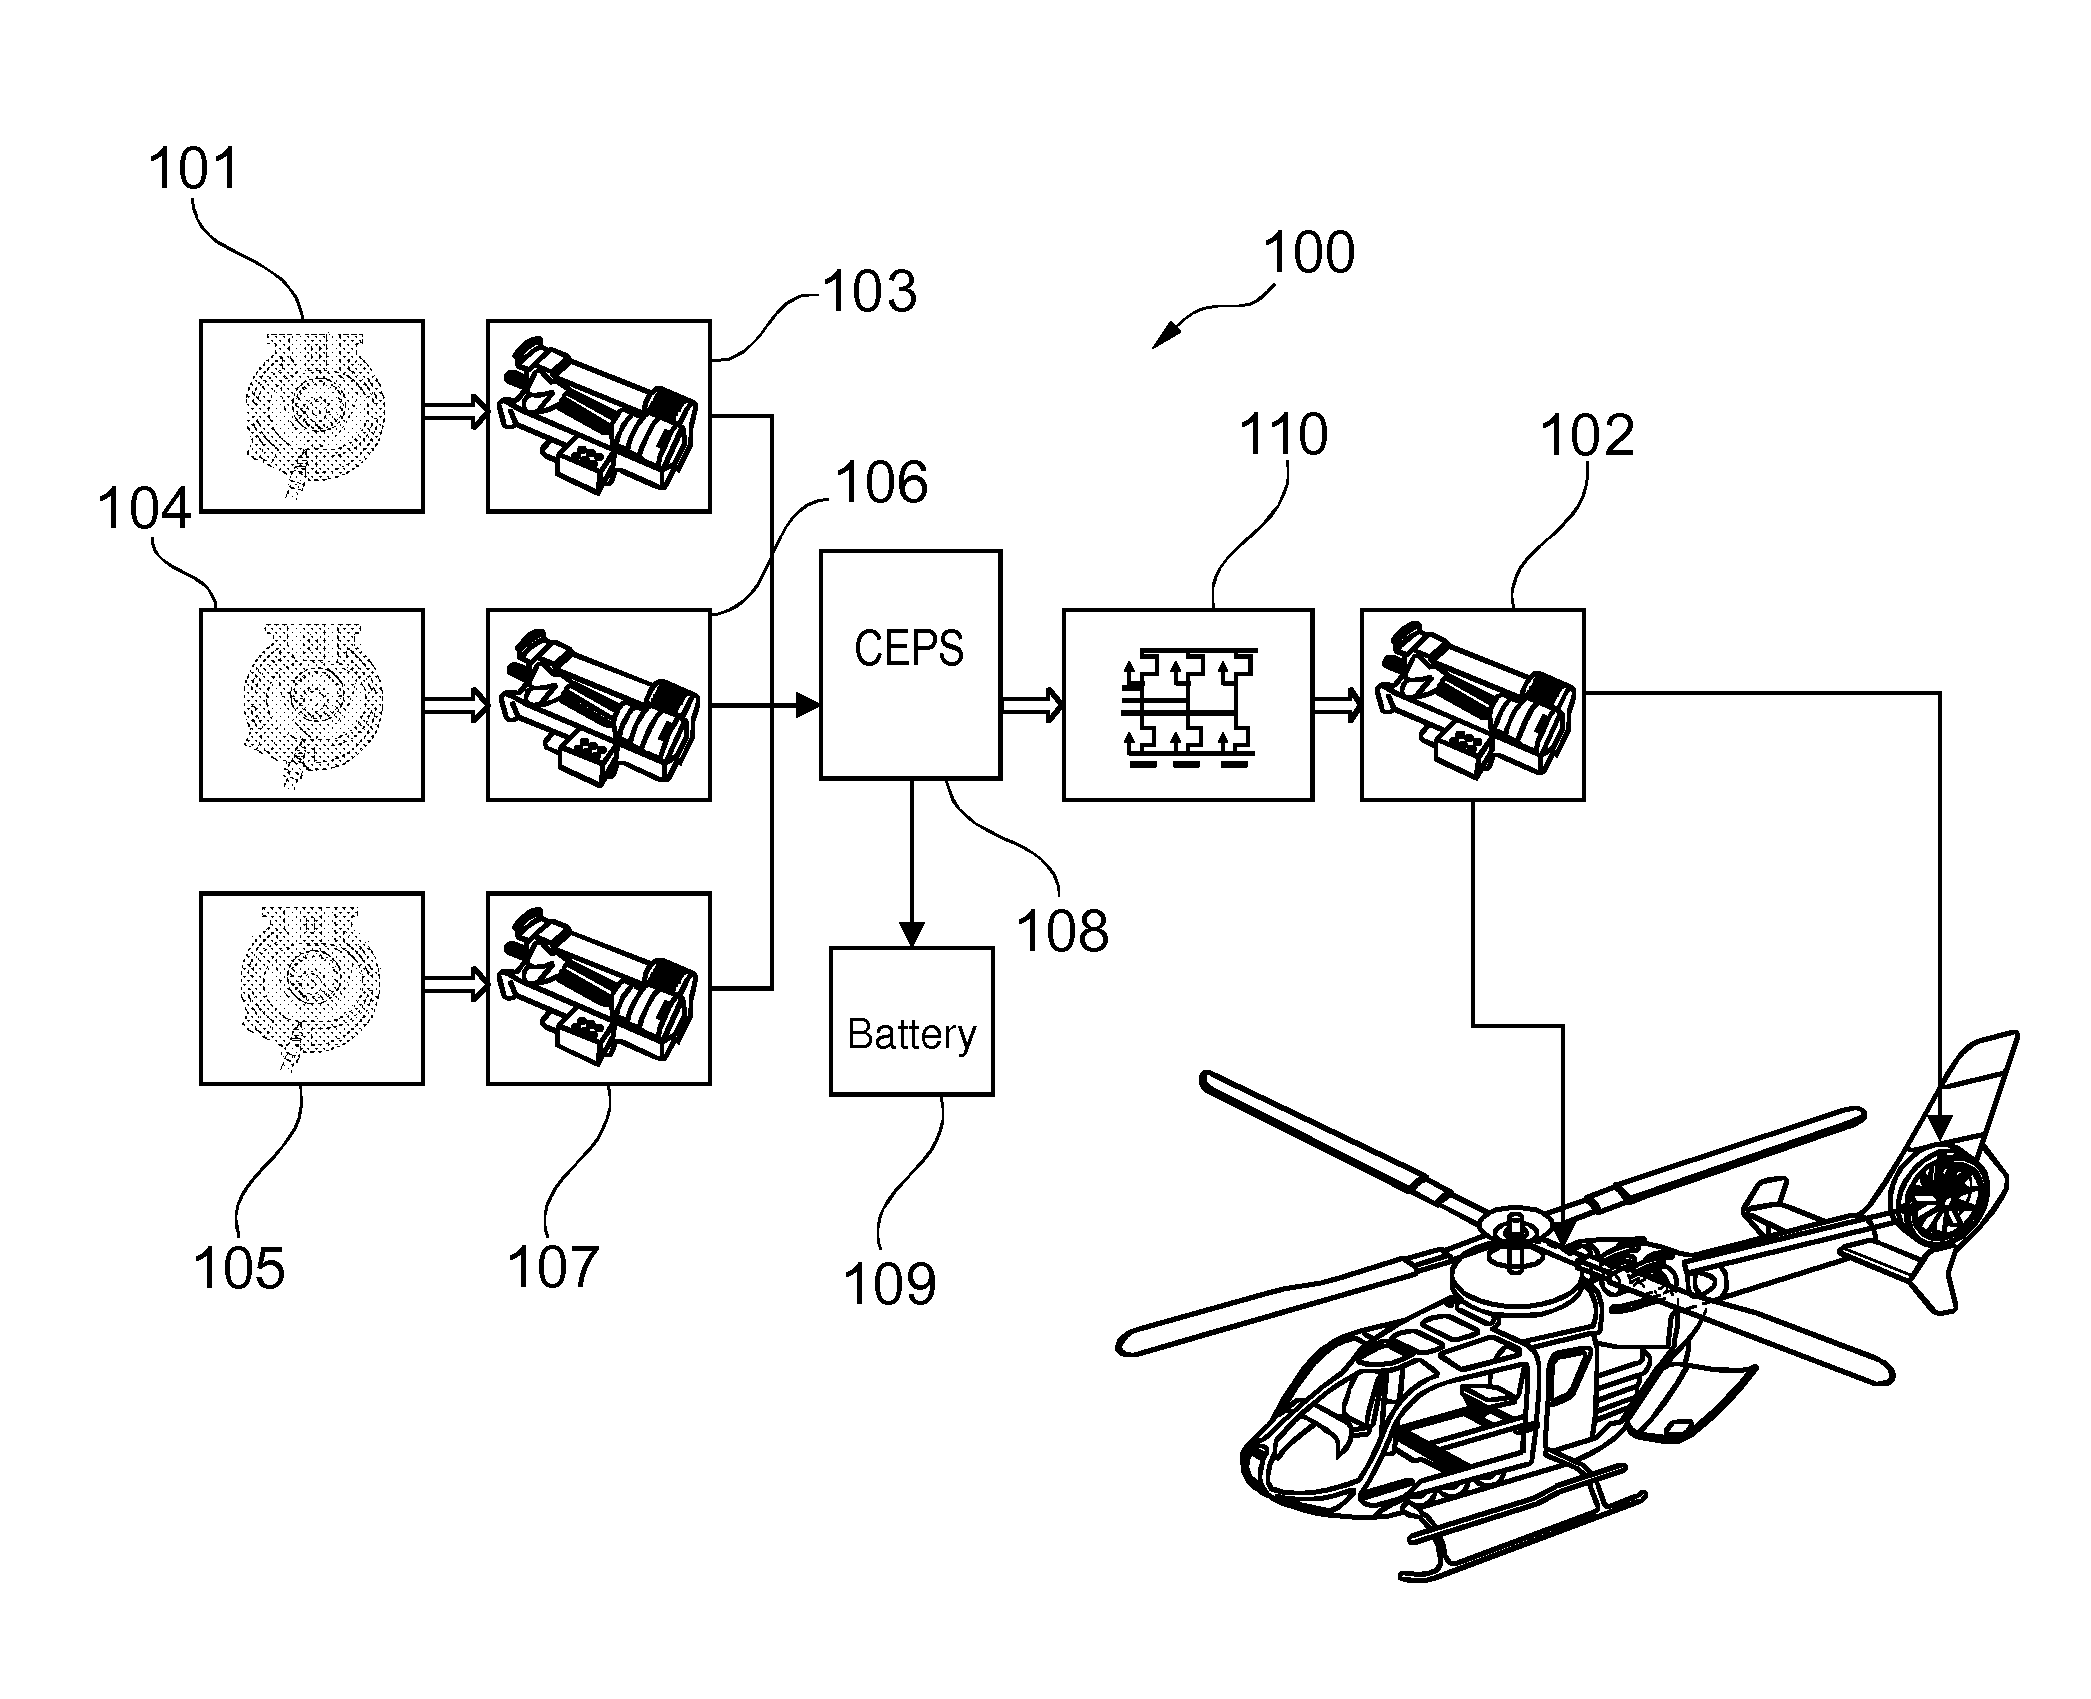 Hybrid drive for helicopters